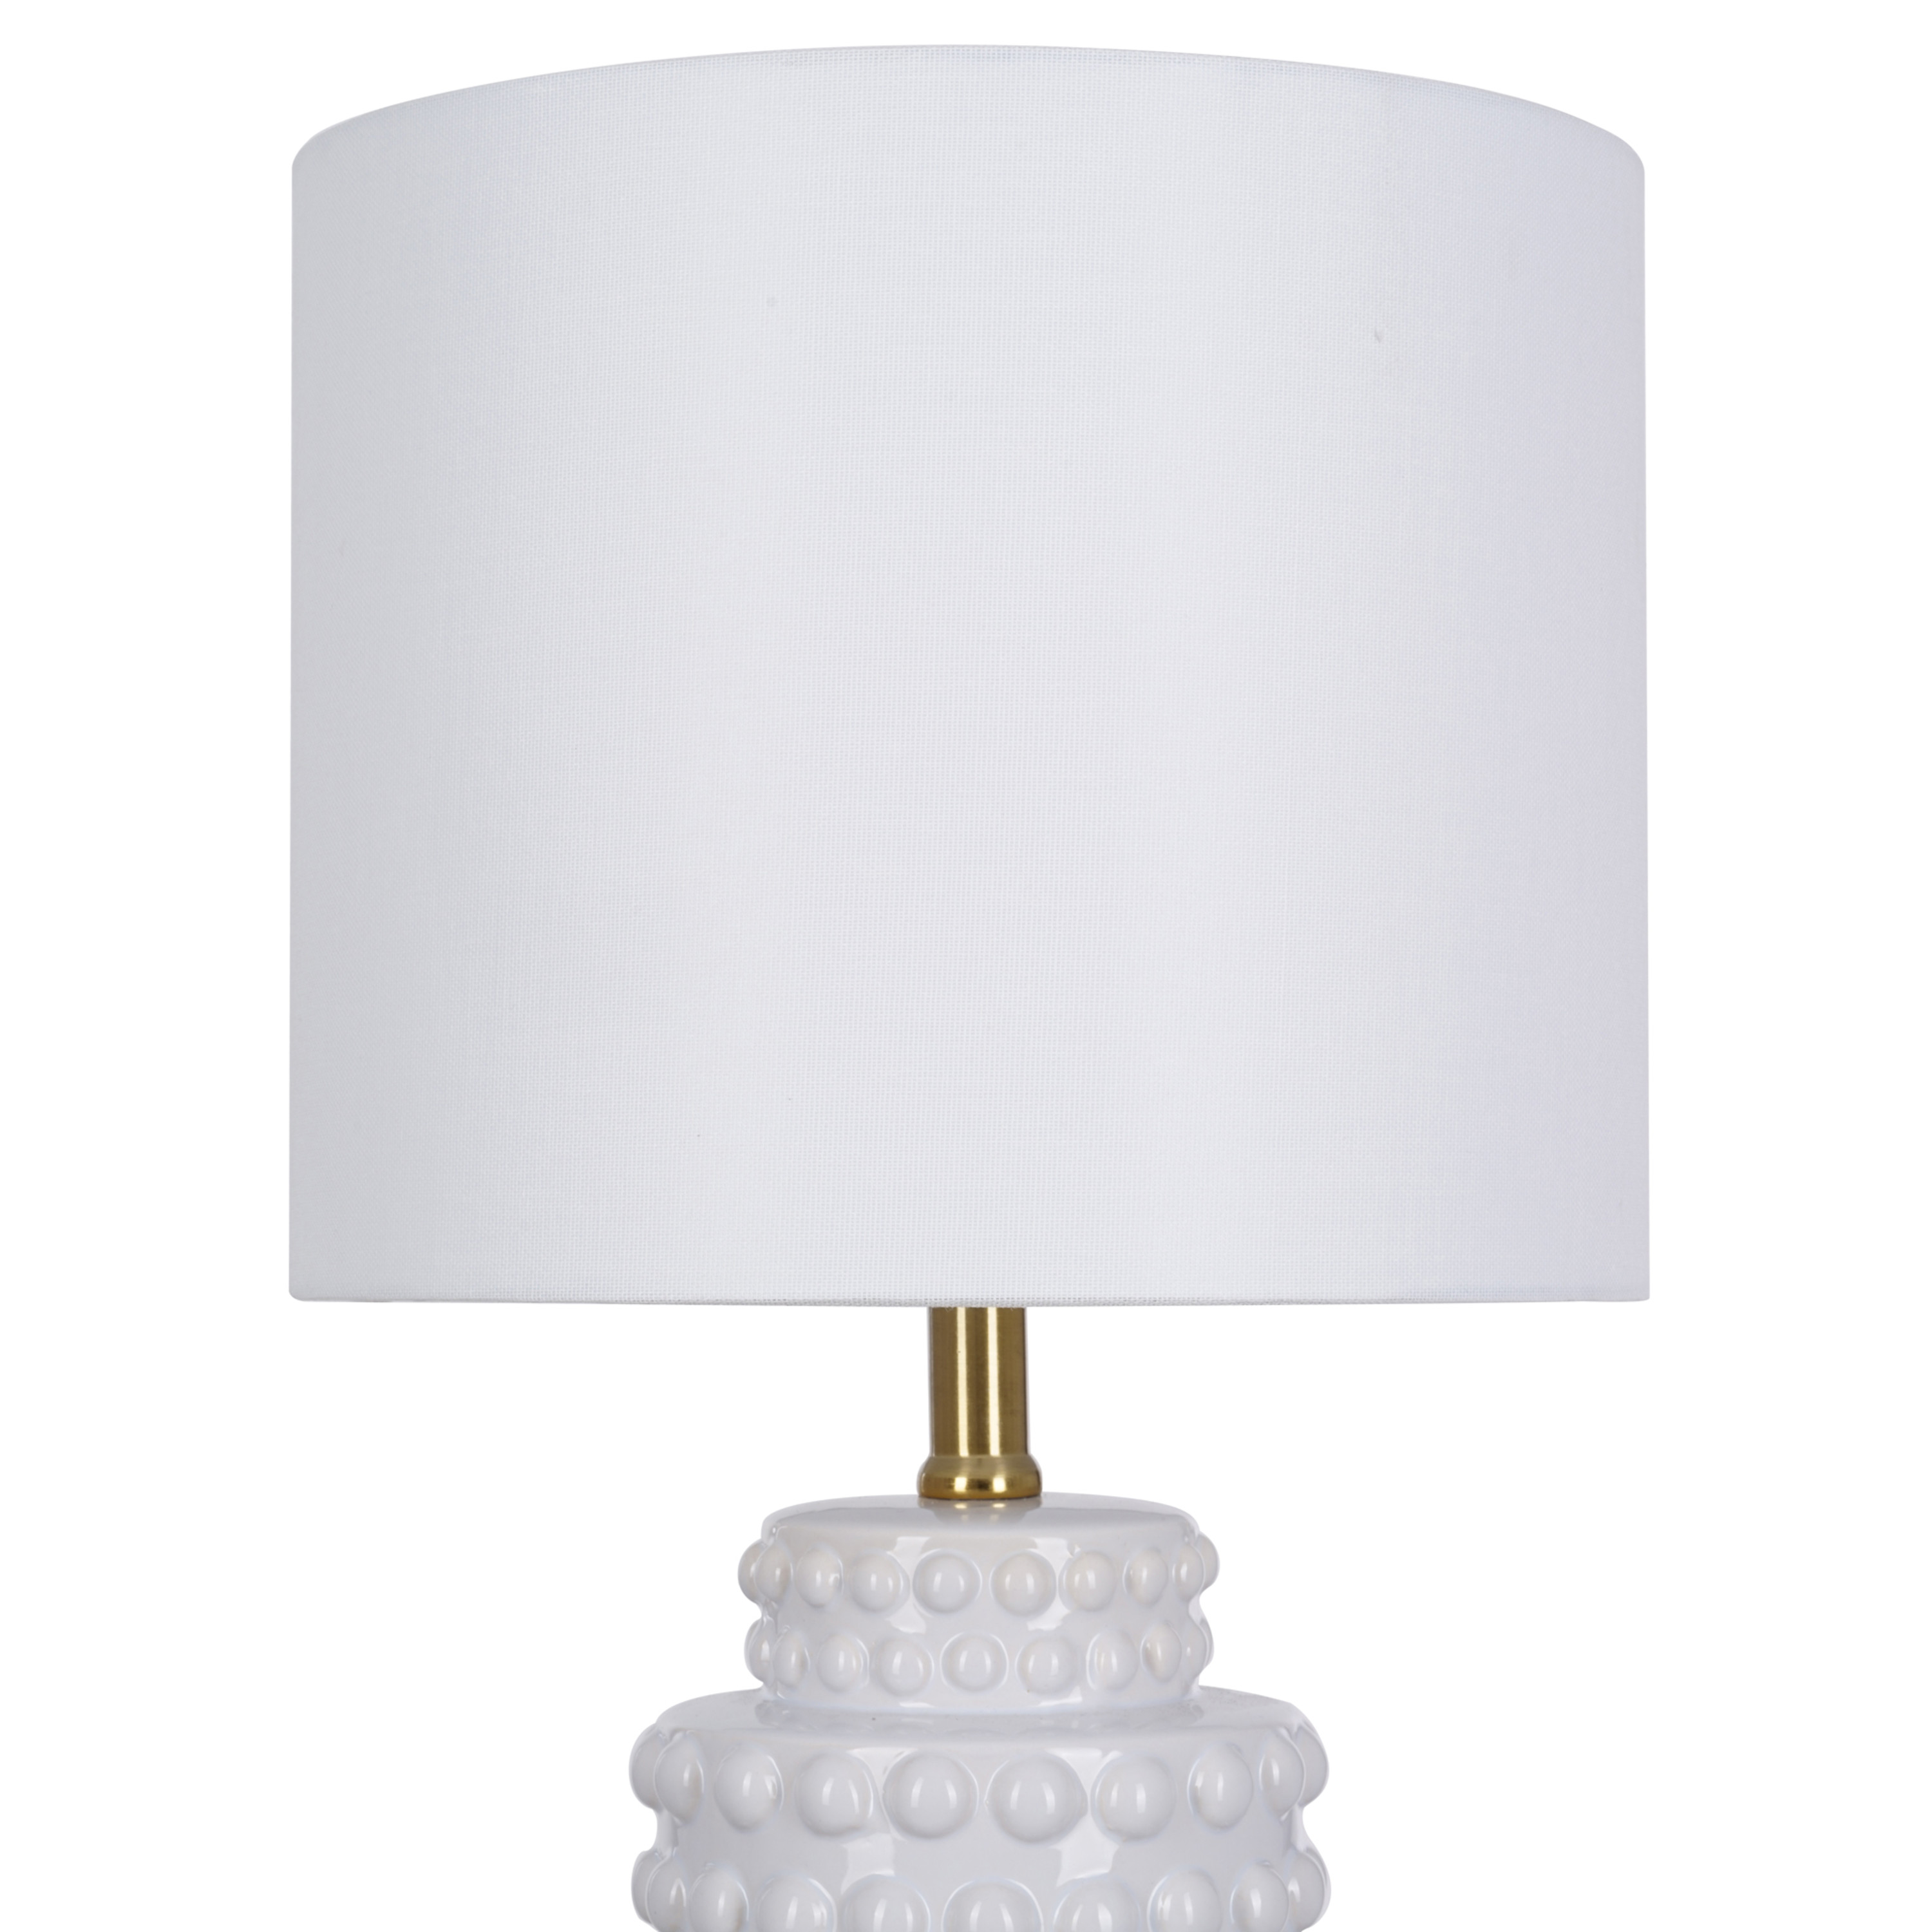 My Texas House 21" Hob-Nail Ceramic Table Lamp, Brass Accents, White Finish, LED Bulb Included - image 4 of 8